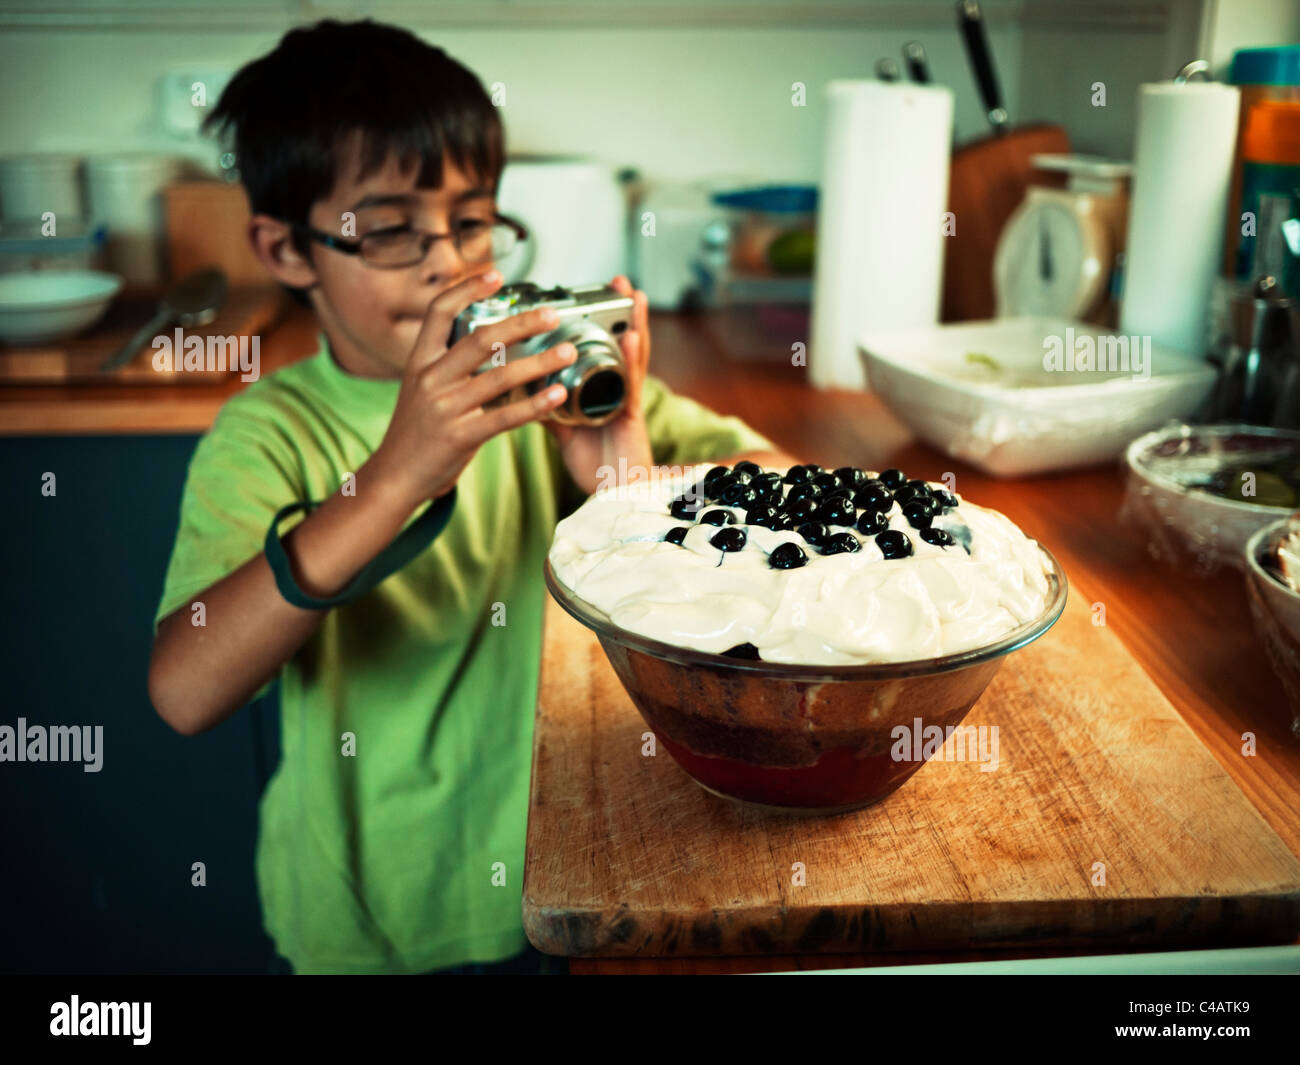 Boy takes picture of homemade trifle. Stock Photo